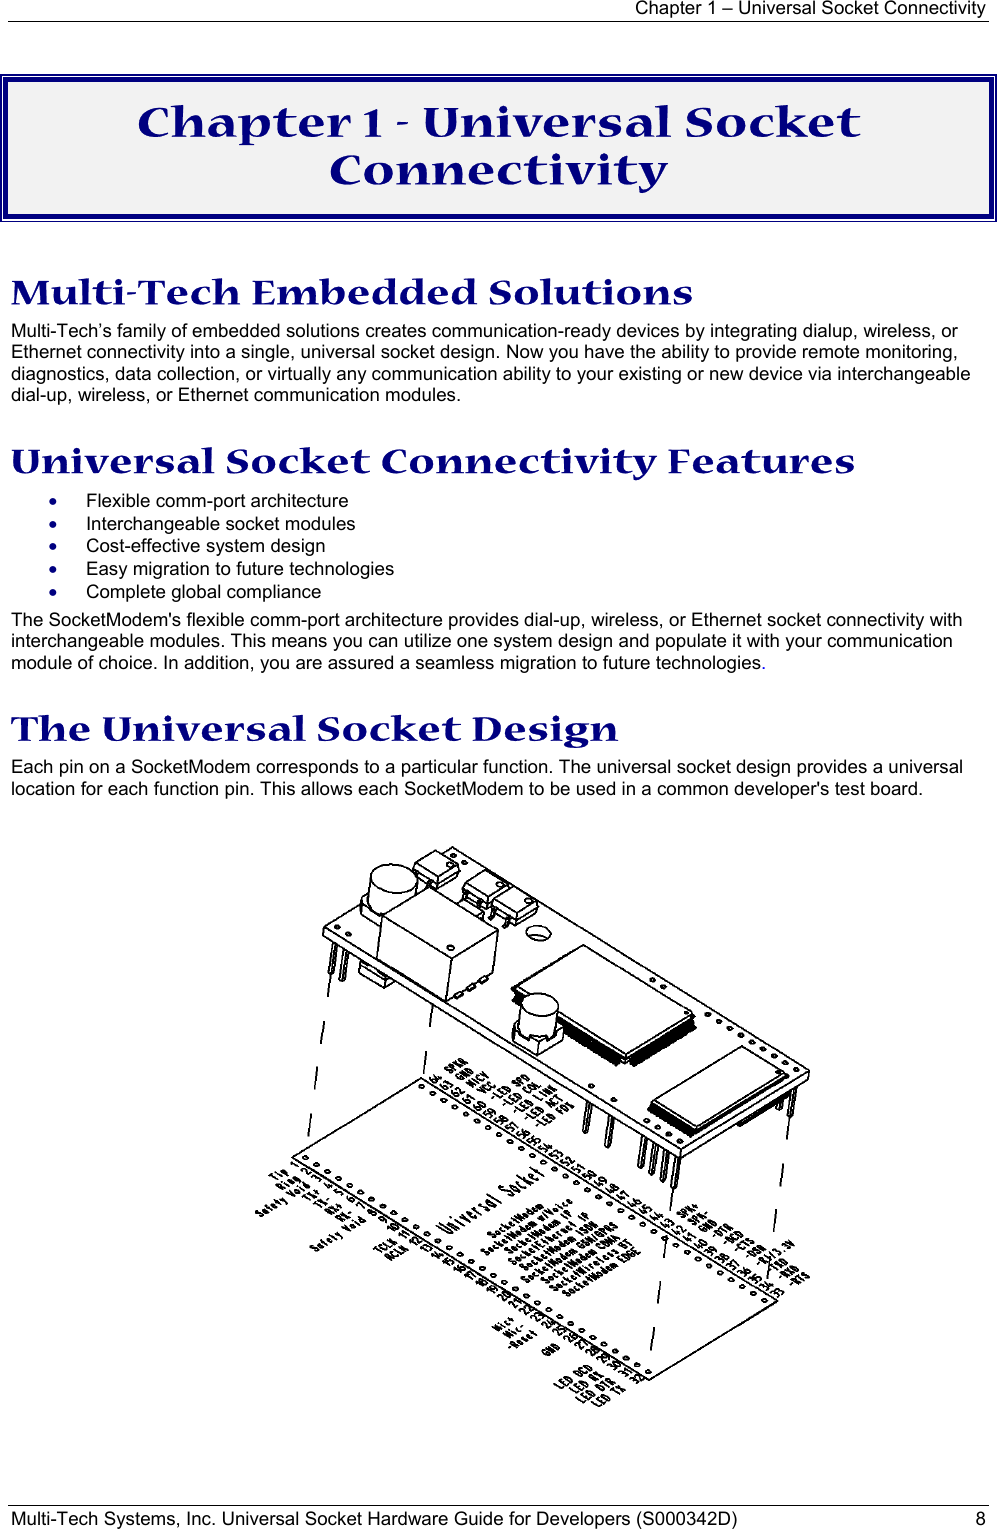 Chapter 1 – Universal Socket Connectivity Multi-Tech Systems, Inc. Universal Socket Hardware Guide for Developers (S000342D)  8  Chapter 1 - Universal Socket Connectivity  Multi-Tech Embedded Solutions Multi-Tech’s family of embedded solutions creates communication-ready devices by integrating dialup, wireless, or Ethernet connectivity into a single, universal socket design. Now you have the ability to provide remote monitoring, diagnostics, data collection, or virtually any communication ability to your existing or new device via interchangeable dial-up, wireless, or Ethernet communication modules.  Universal Socket Connectivity Features • Flexible comm-port architecture  • Interchangeable socket modules • Cost-effective system design • Easy migration to future technologies • Complete global compliance The SocketModem&apos;s flexible comm-port architecture provides dial-up, wireless, or Ethernet socket connectivity with interchangeable modules. This means you can utilize one system design and populate it with your communication module of choice. In addition, you are assured a seamless migration to future technologies. The Universal Socket Design  Each pin on a SocketModem corresponds to a particular function. The universal socket design provides a universal location for each function pin. This allows each SocketModem to be used in a common developer&apos;s test board.     